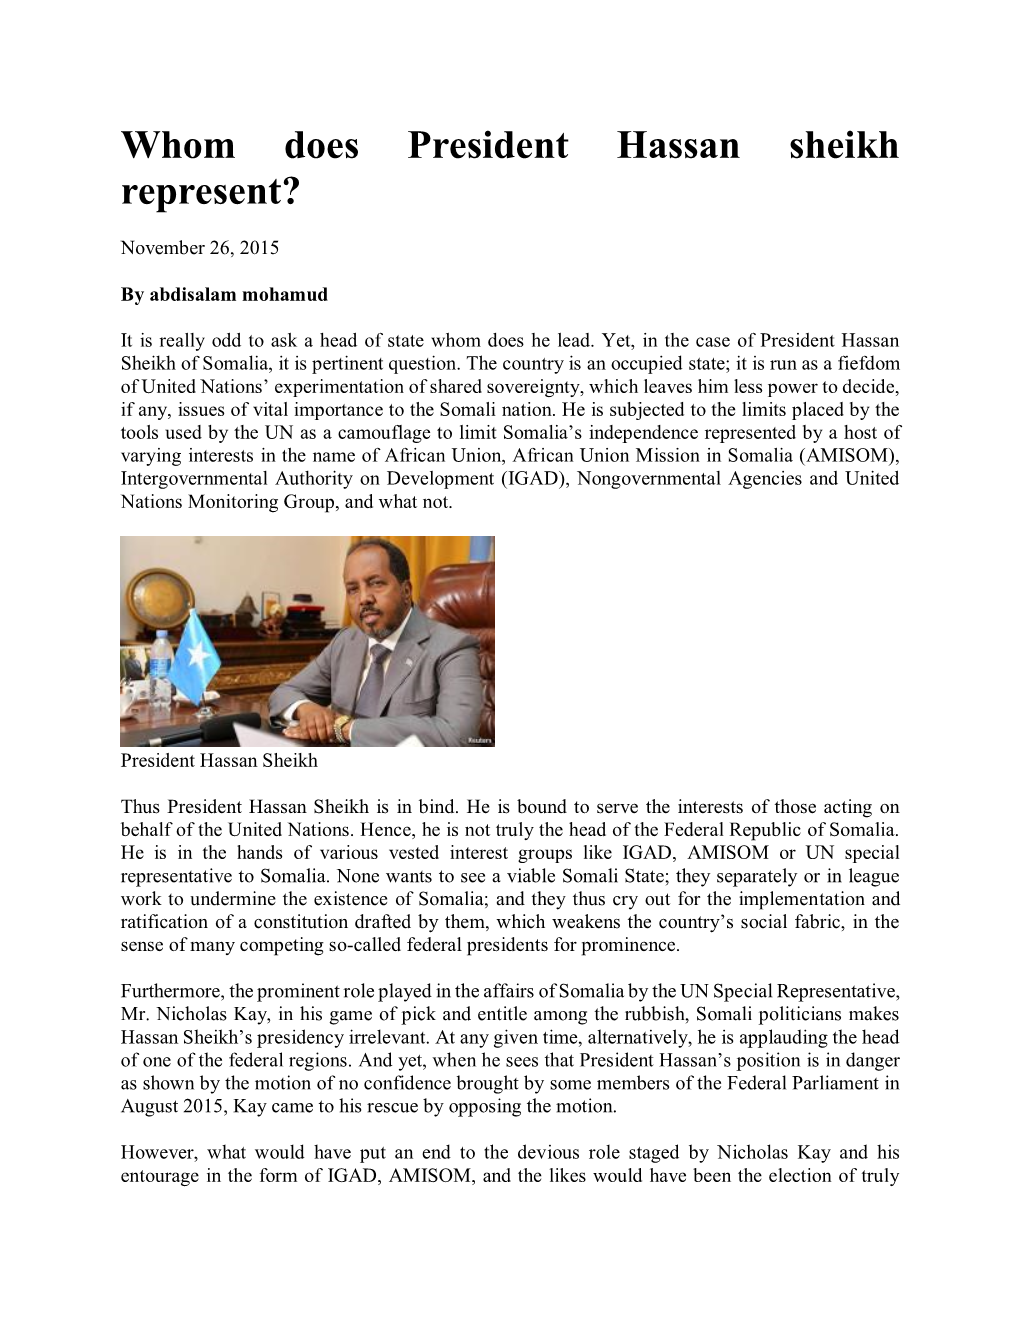 Whom Does President Hassan Sheikh Represent?